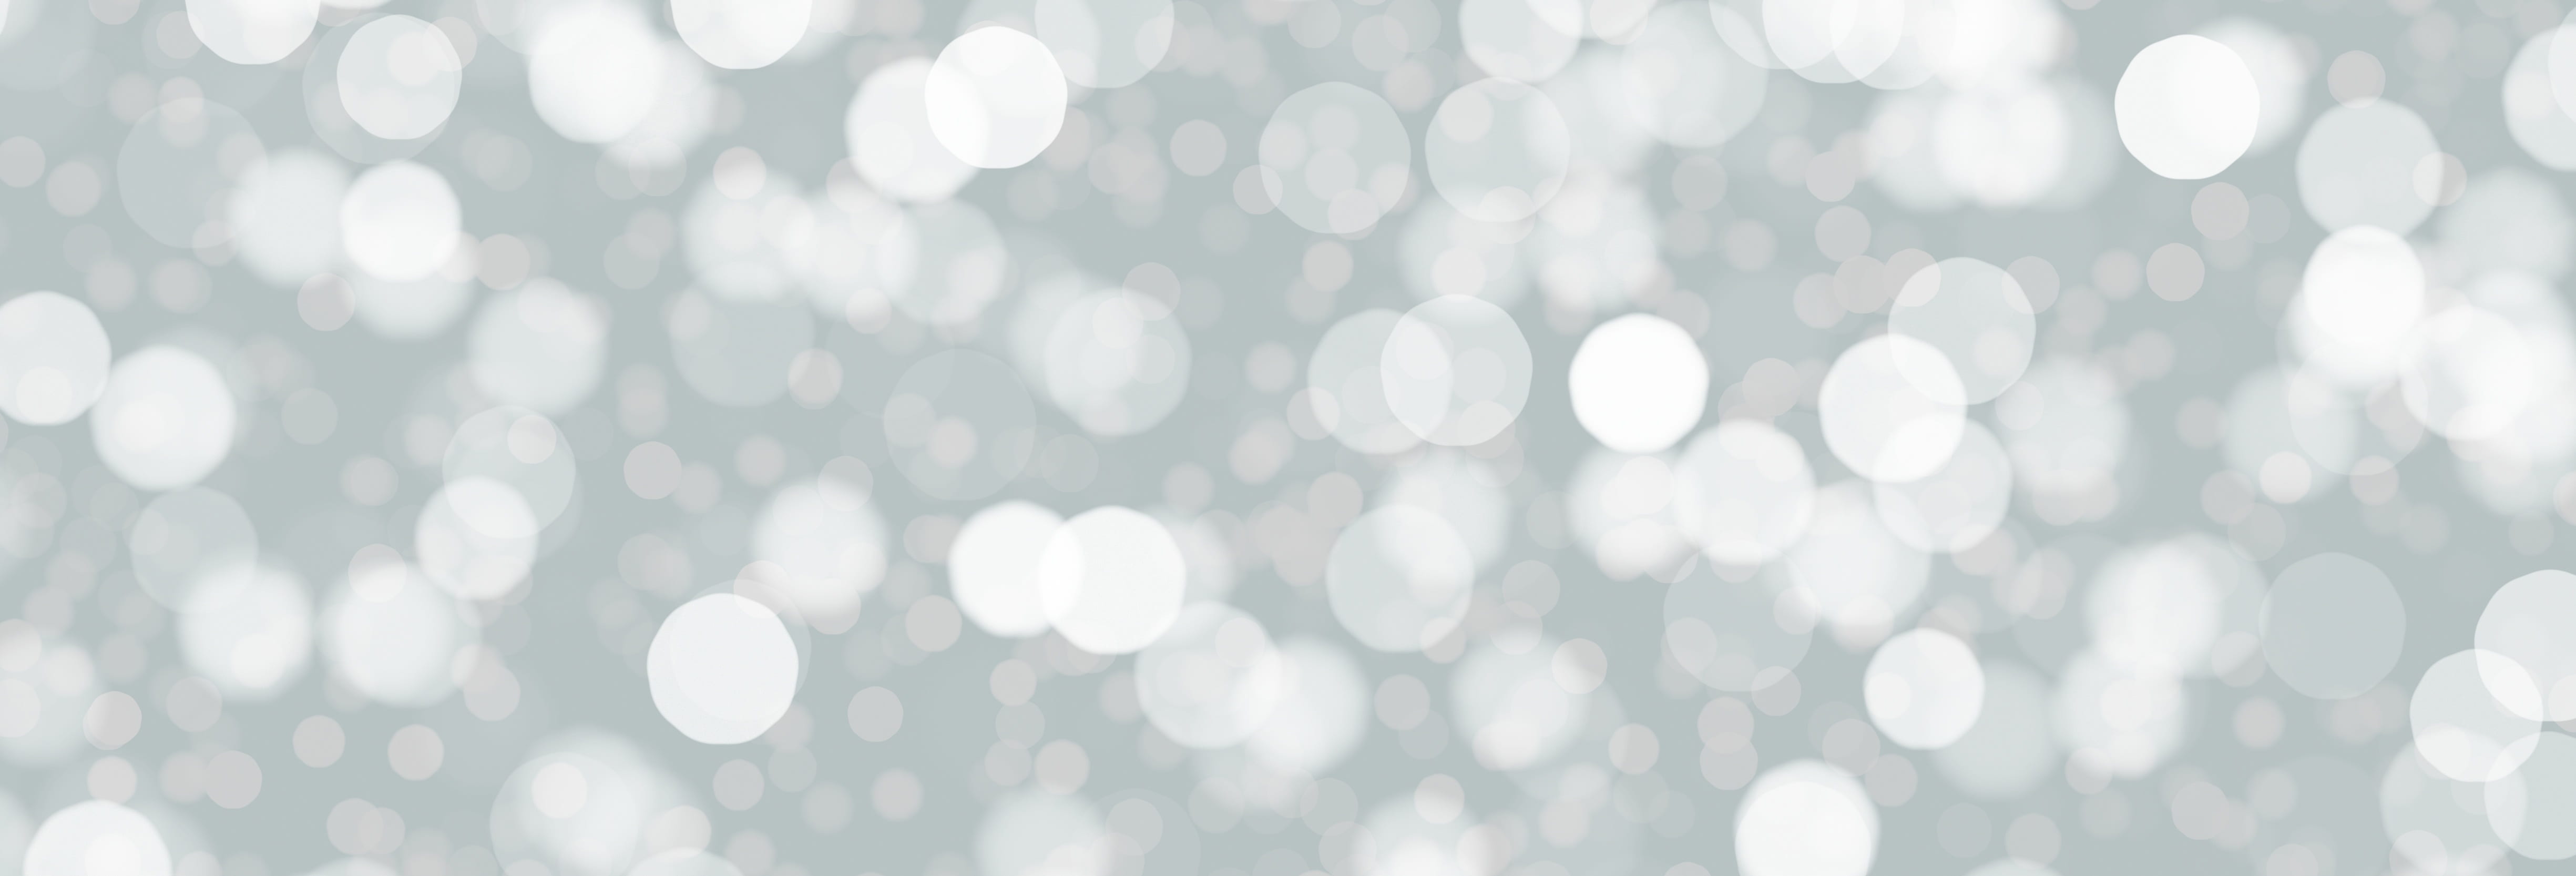 gray and white bokeh photography, light, background, points, circle